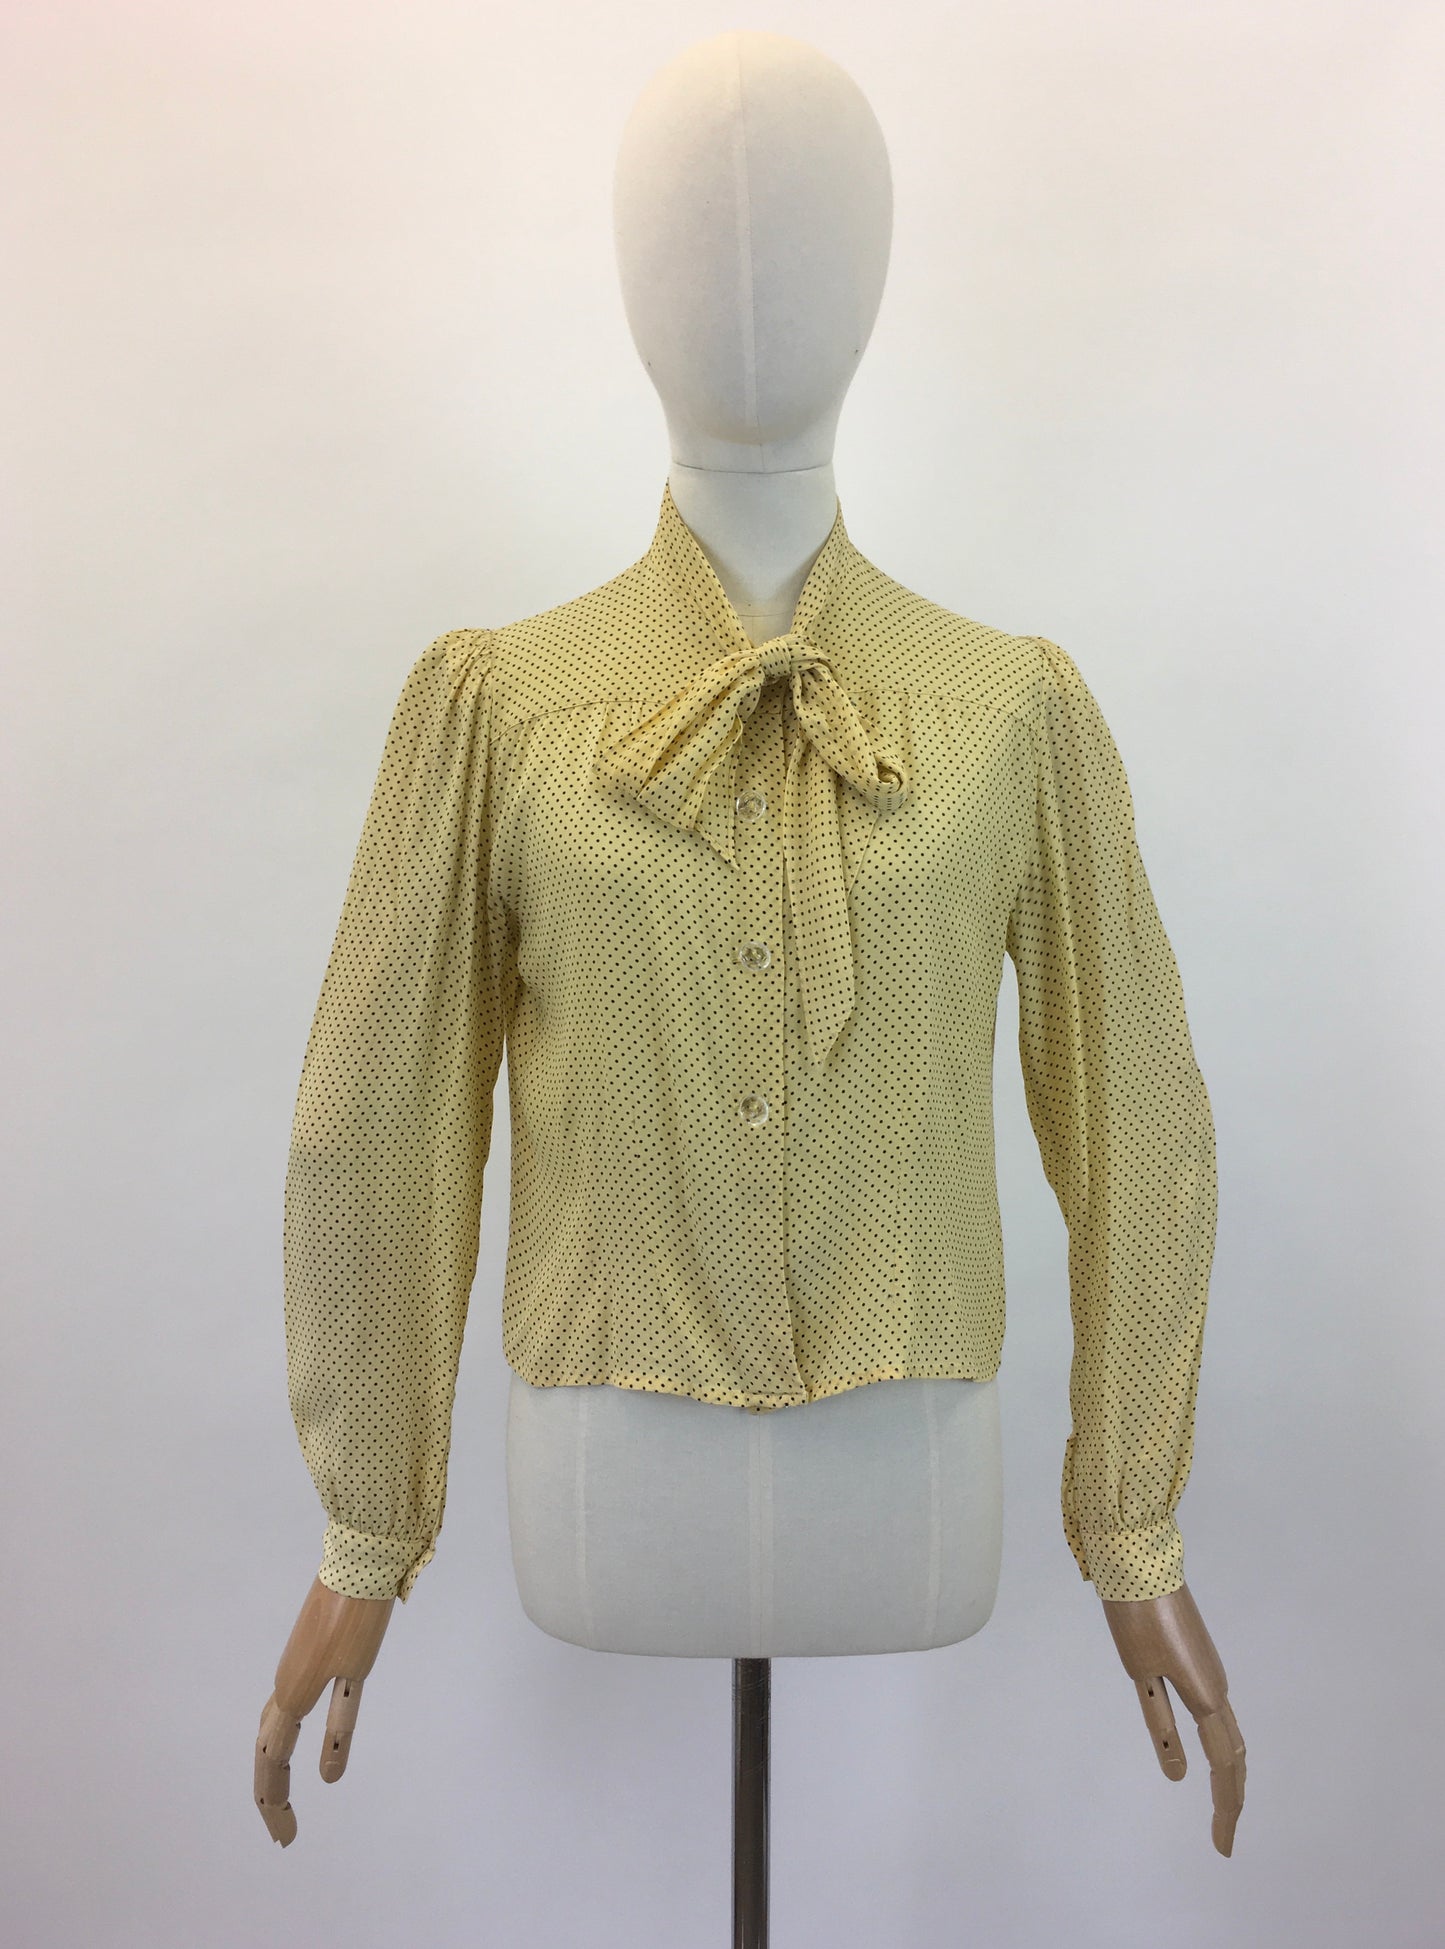 Original 1940's Darling Pussy Bow Blouse - In A Delightful Yellow Polka Dot Crepe